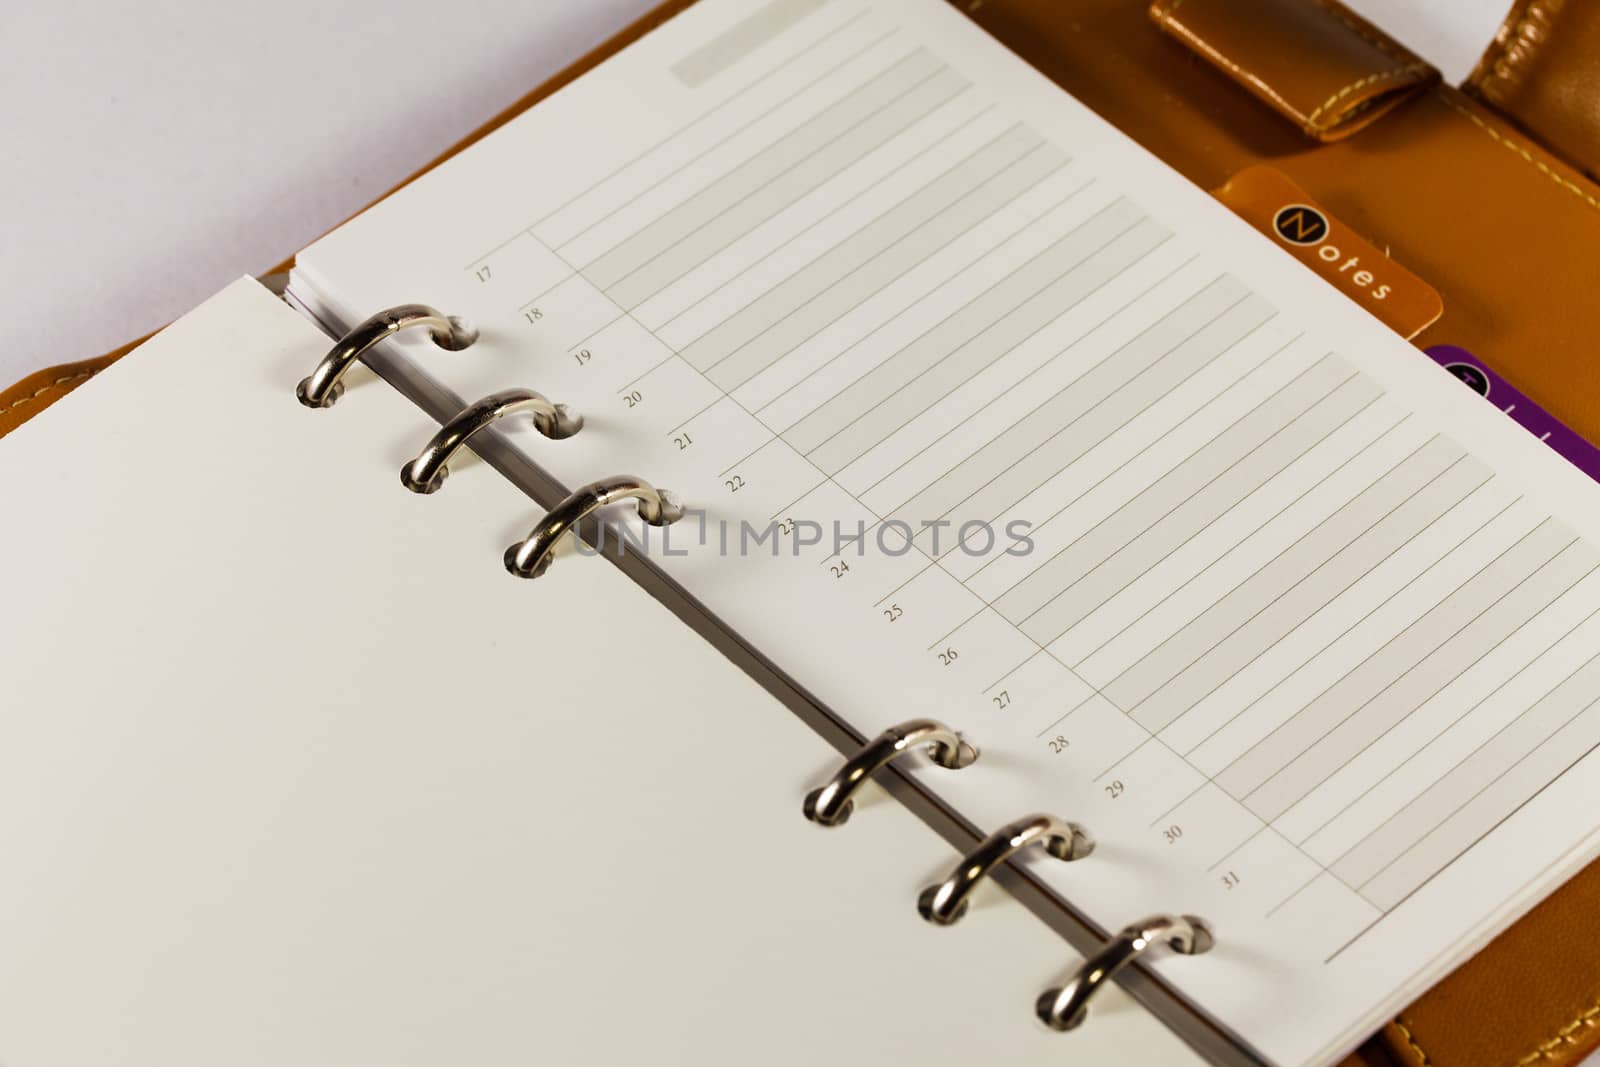 Close up image of black note book organizer against white background